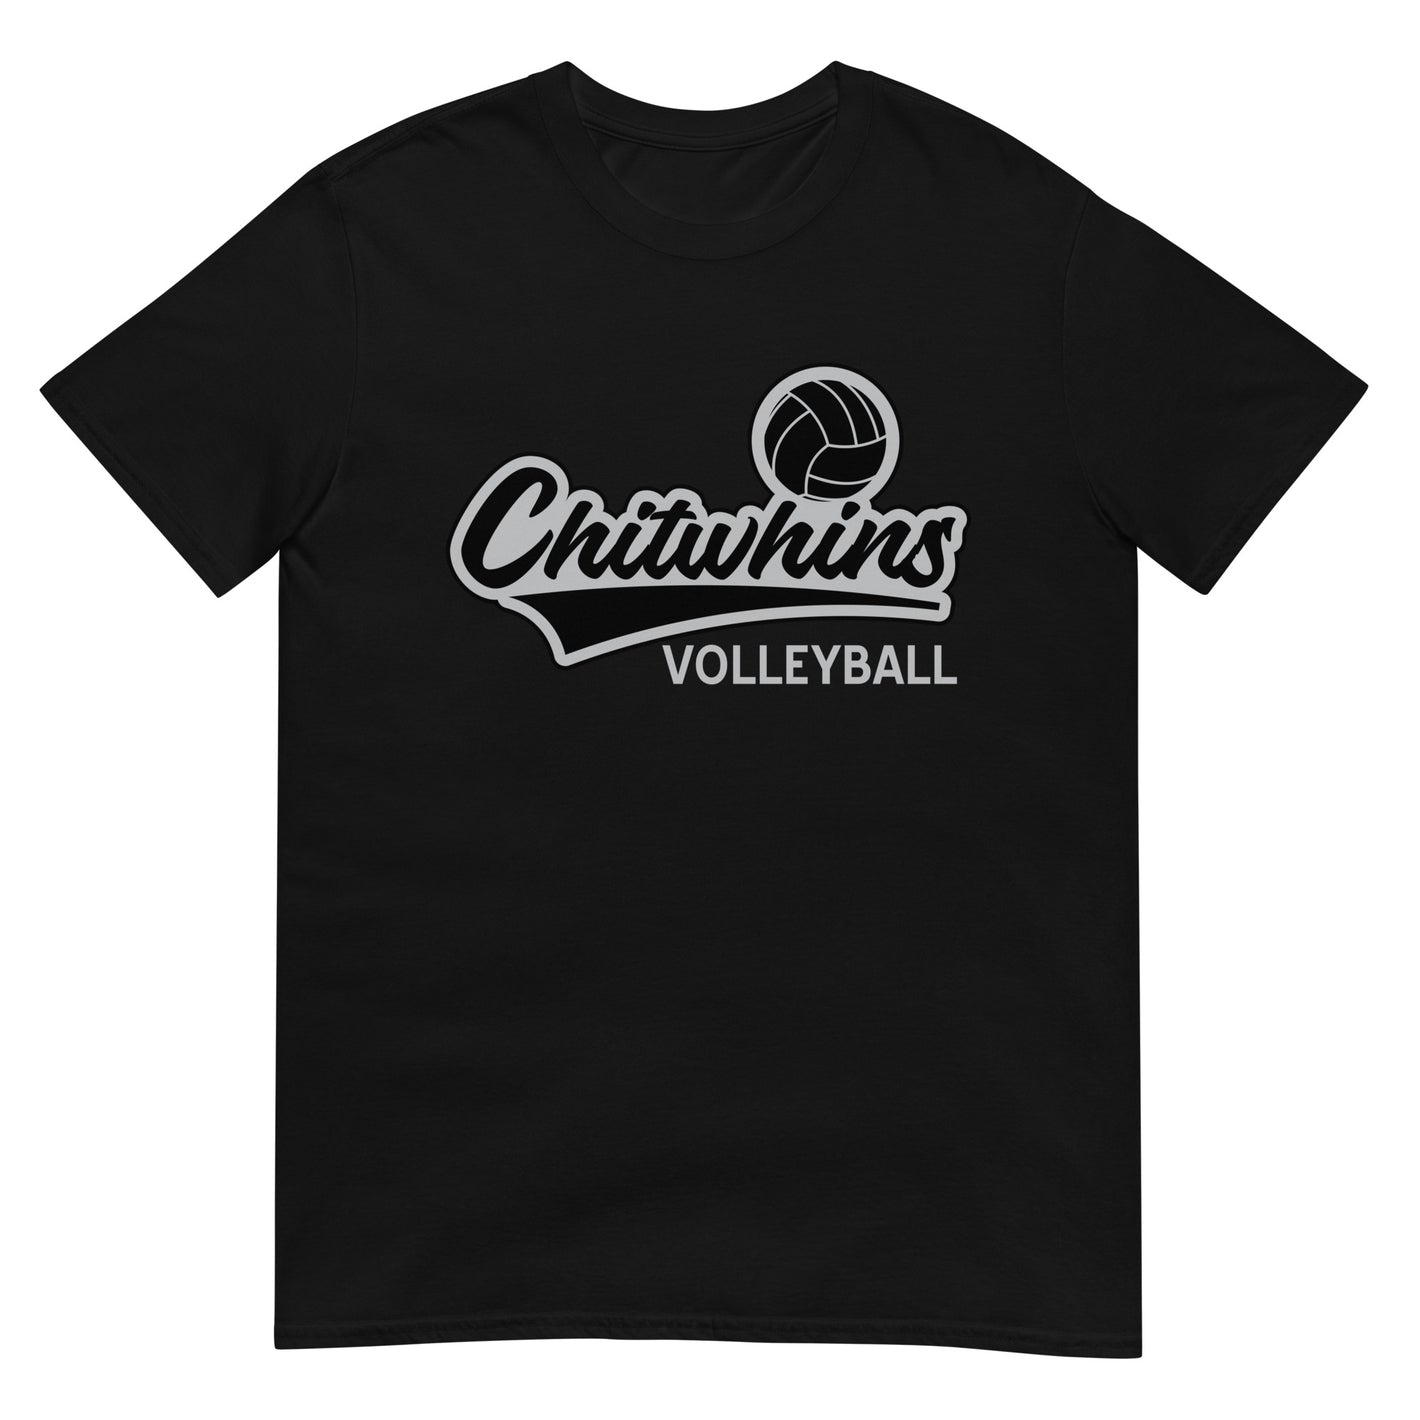 Chitwhins Middle s Volleyball Short-Sleeve Unisex T-Shirt